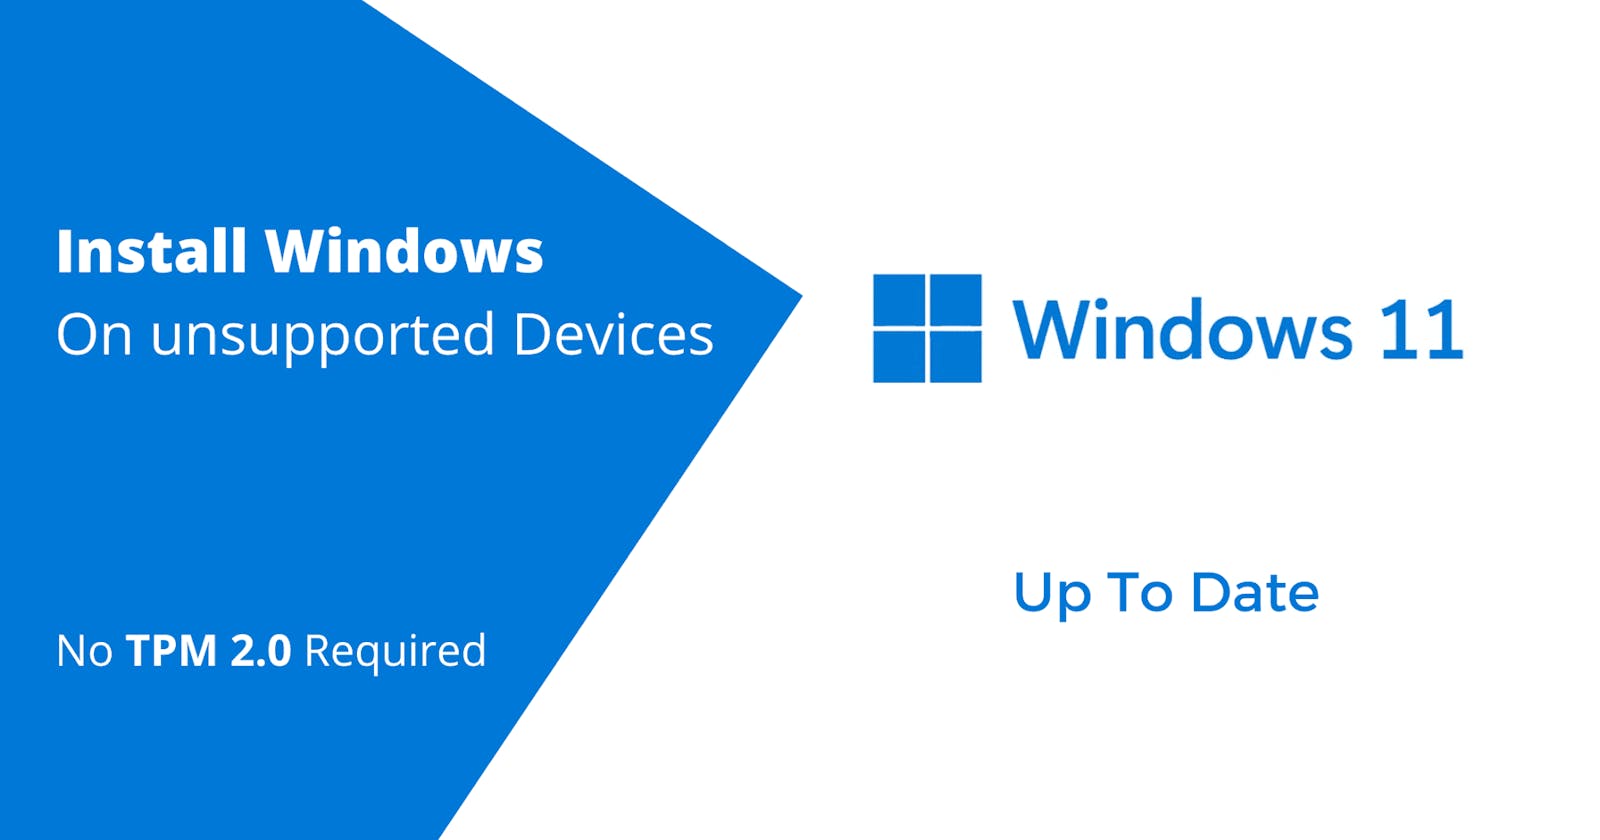 Install Windows 11 on Unsupported Devices